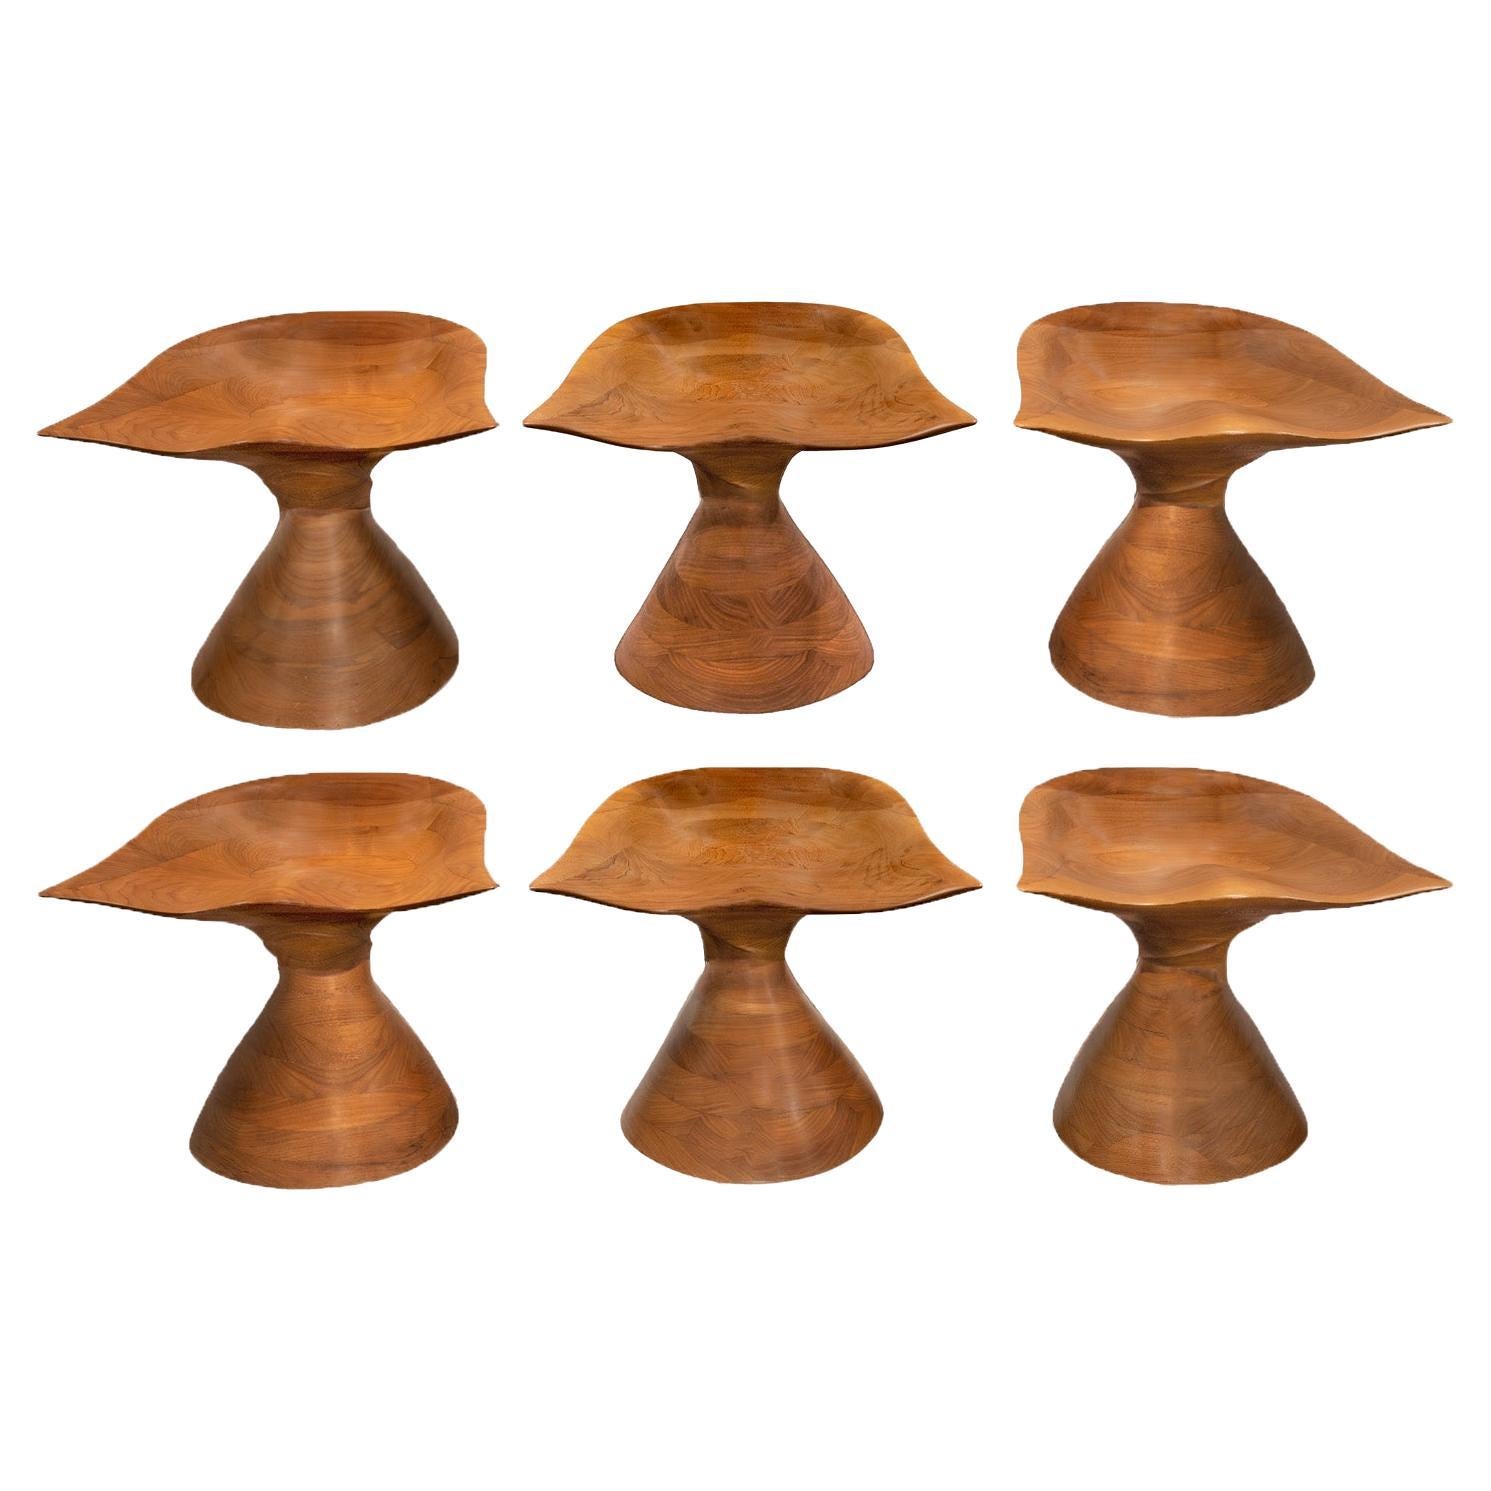 Michael Coffey Rare Set of 6 Hand-Carved Stools in Walnut 2007 (Signed) For Sale